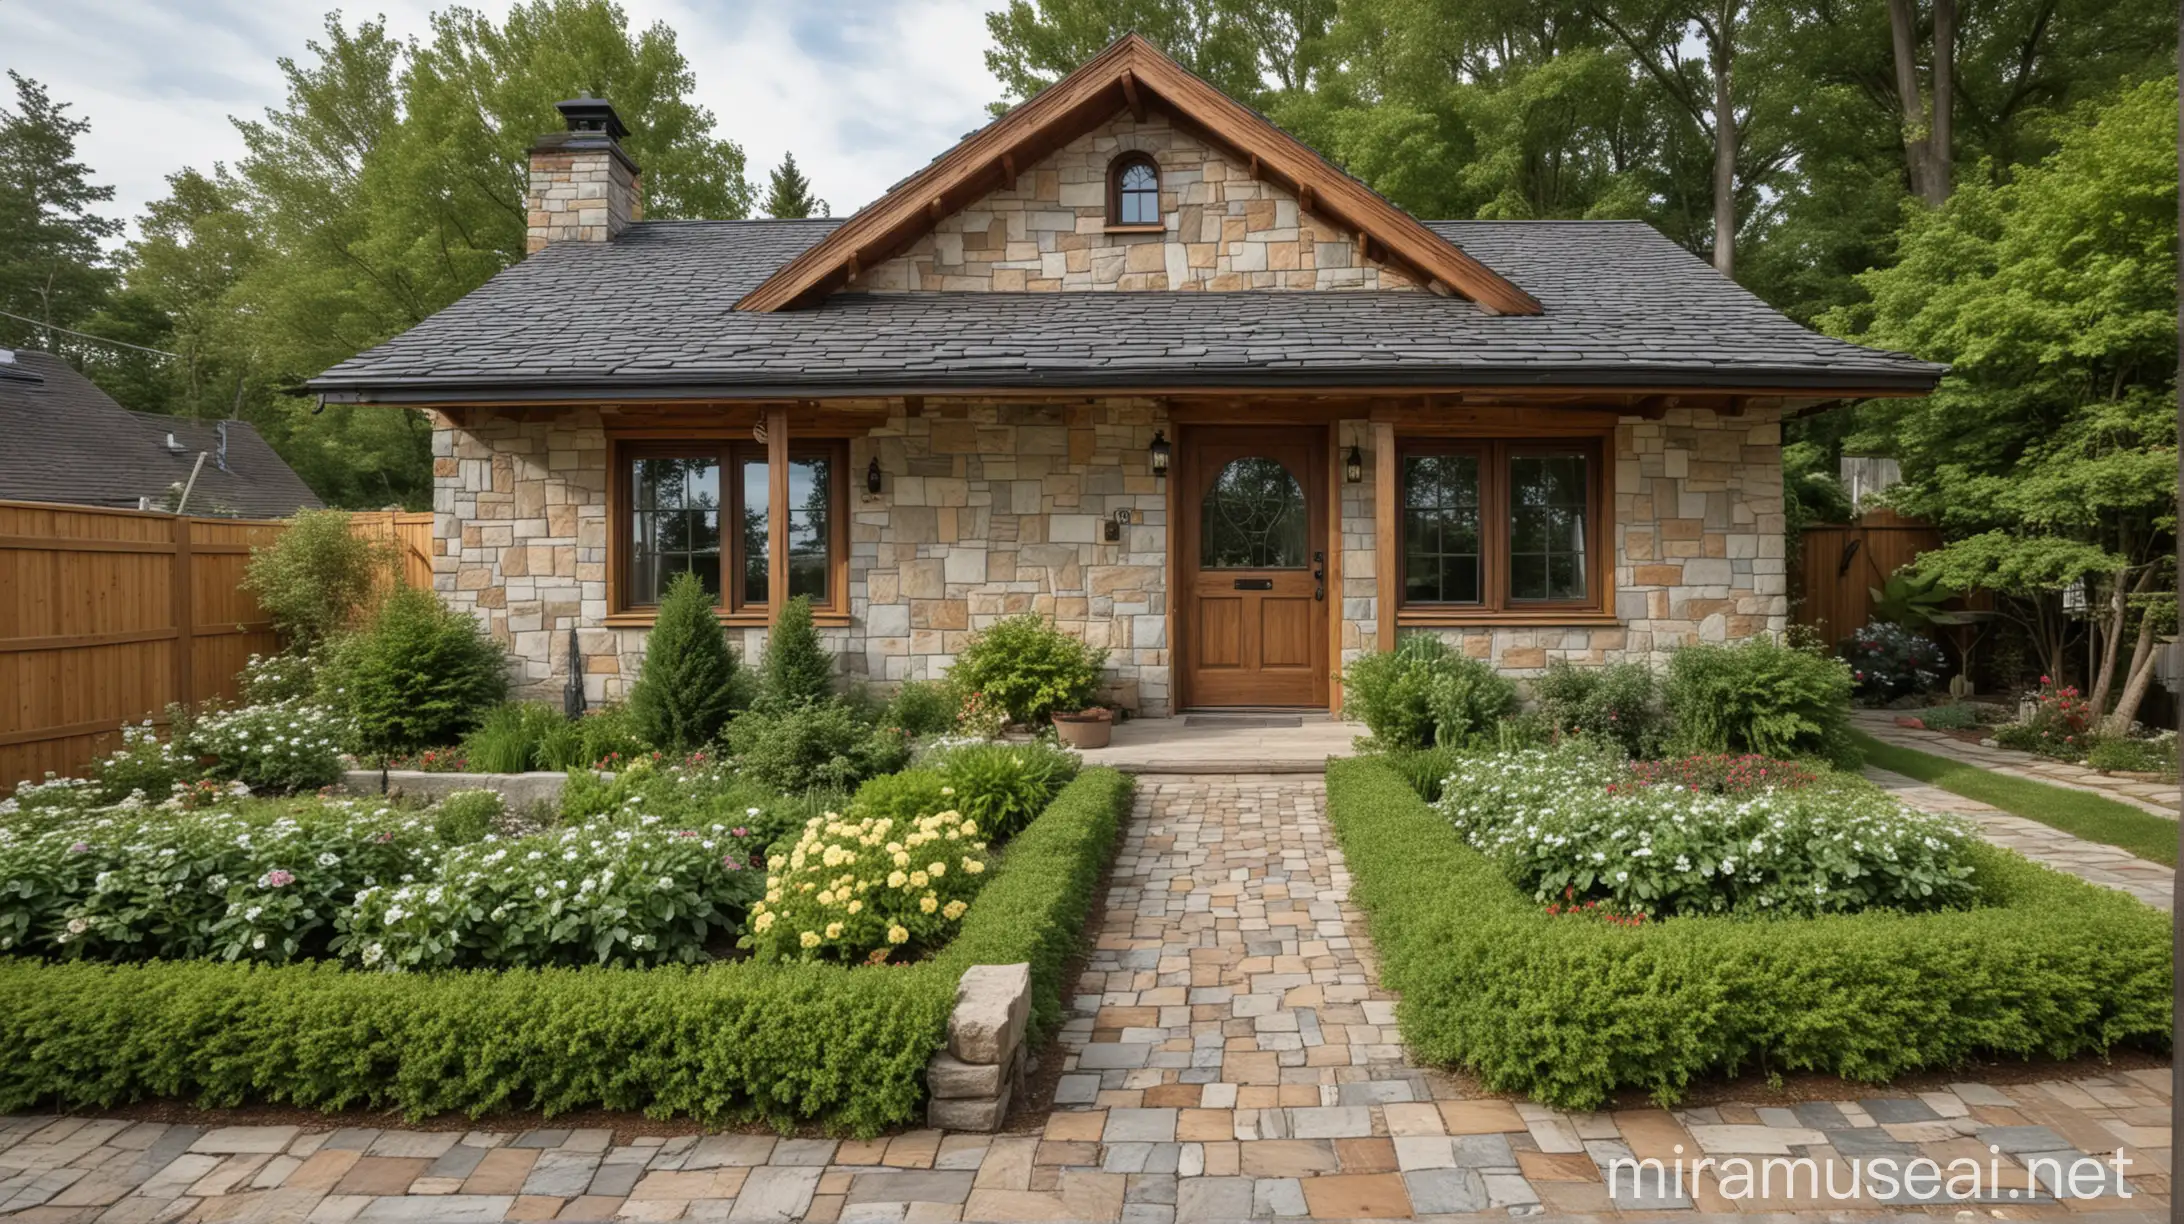 Scenic Cottage with Tiled Walls and Landscaped Front Yard